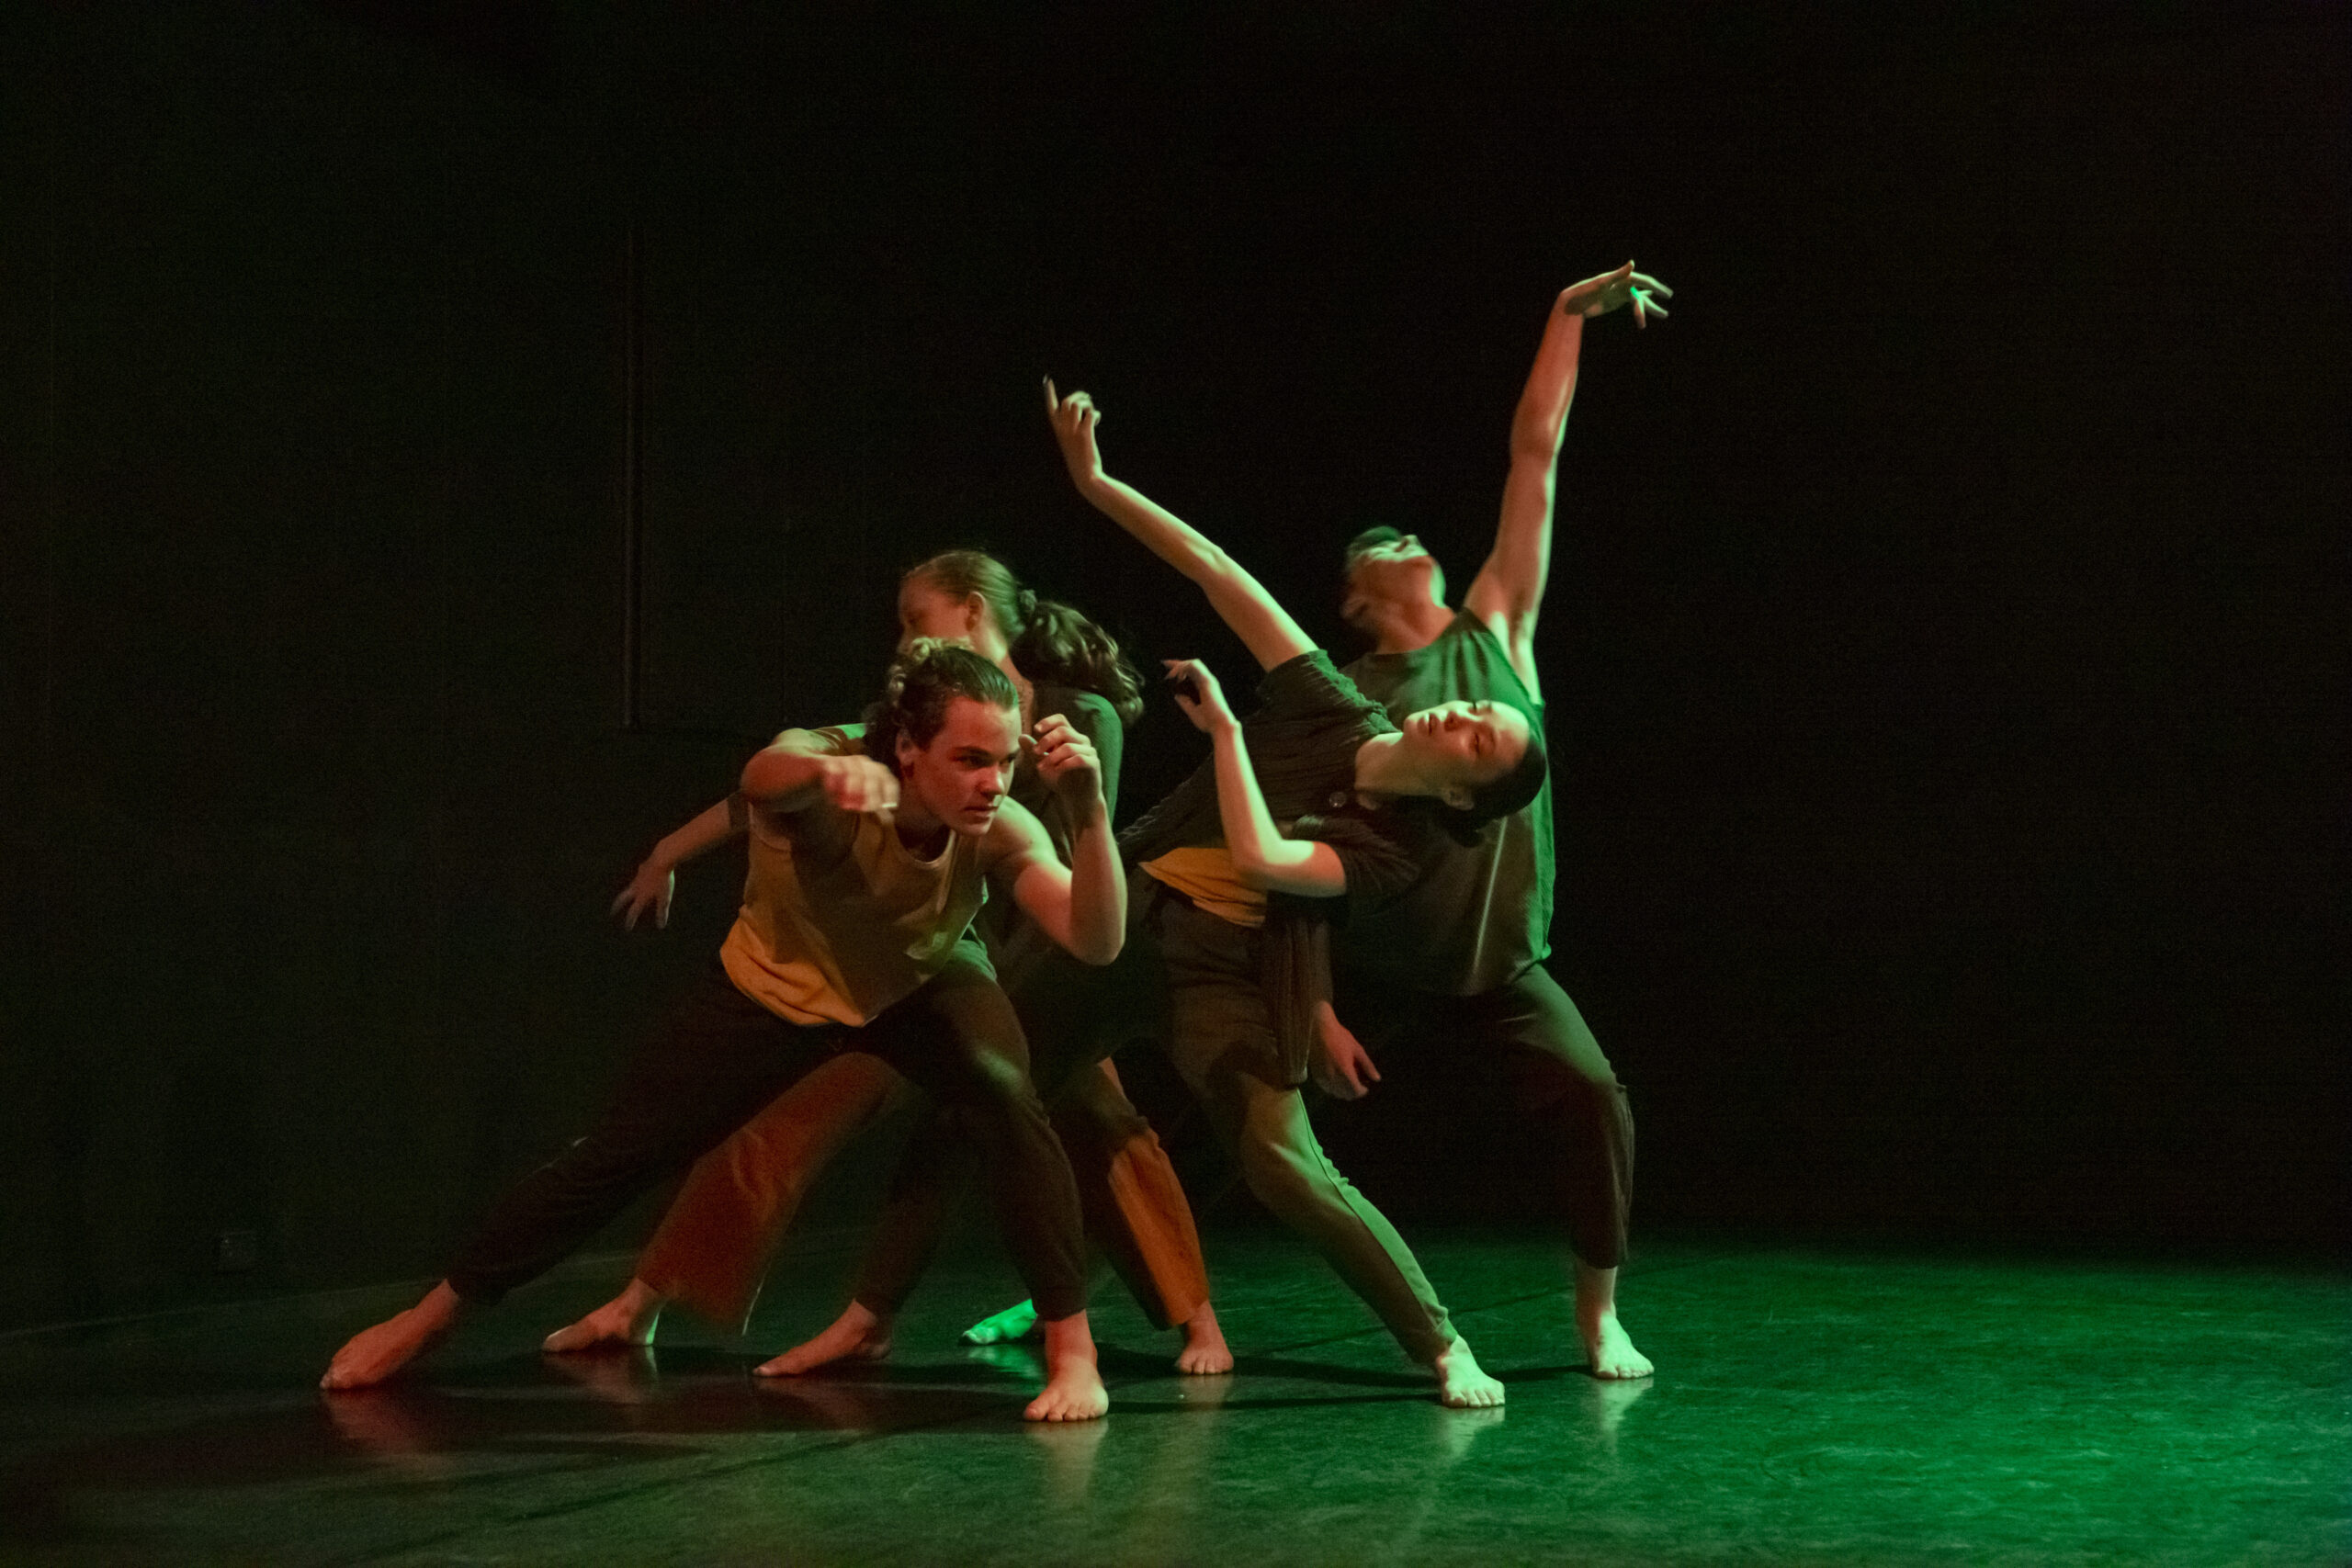 Dancers prepare for the upcoming Hot to Trot performance. Photo credit: Lorna Sim